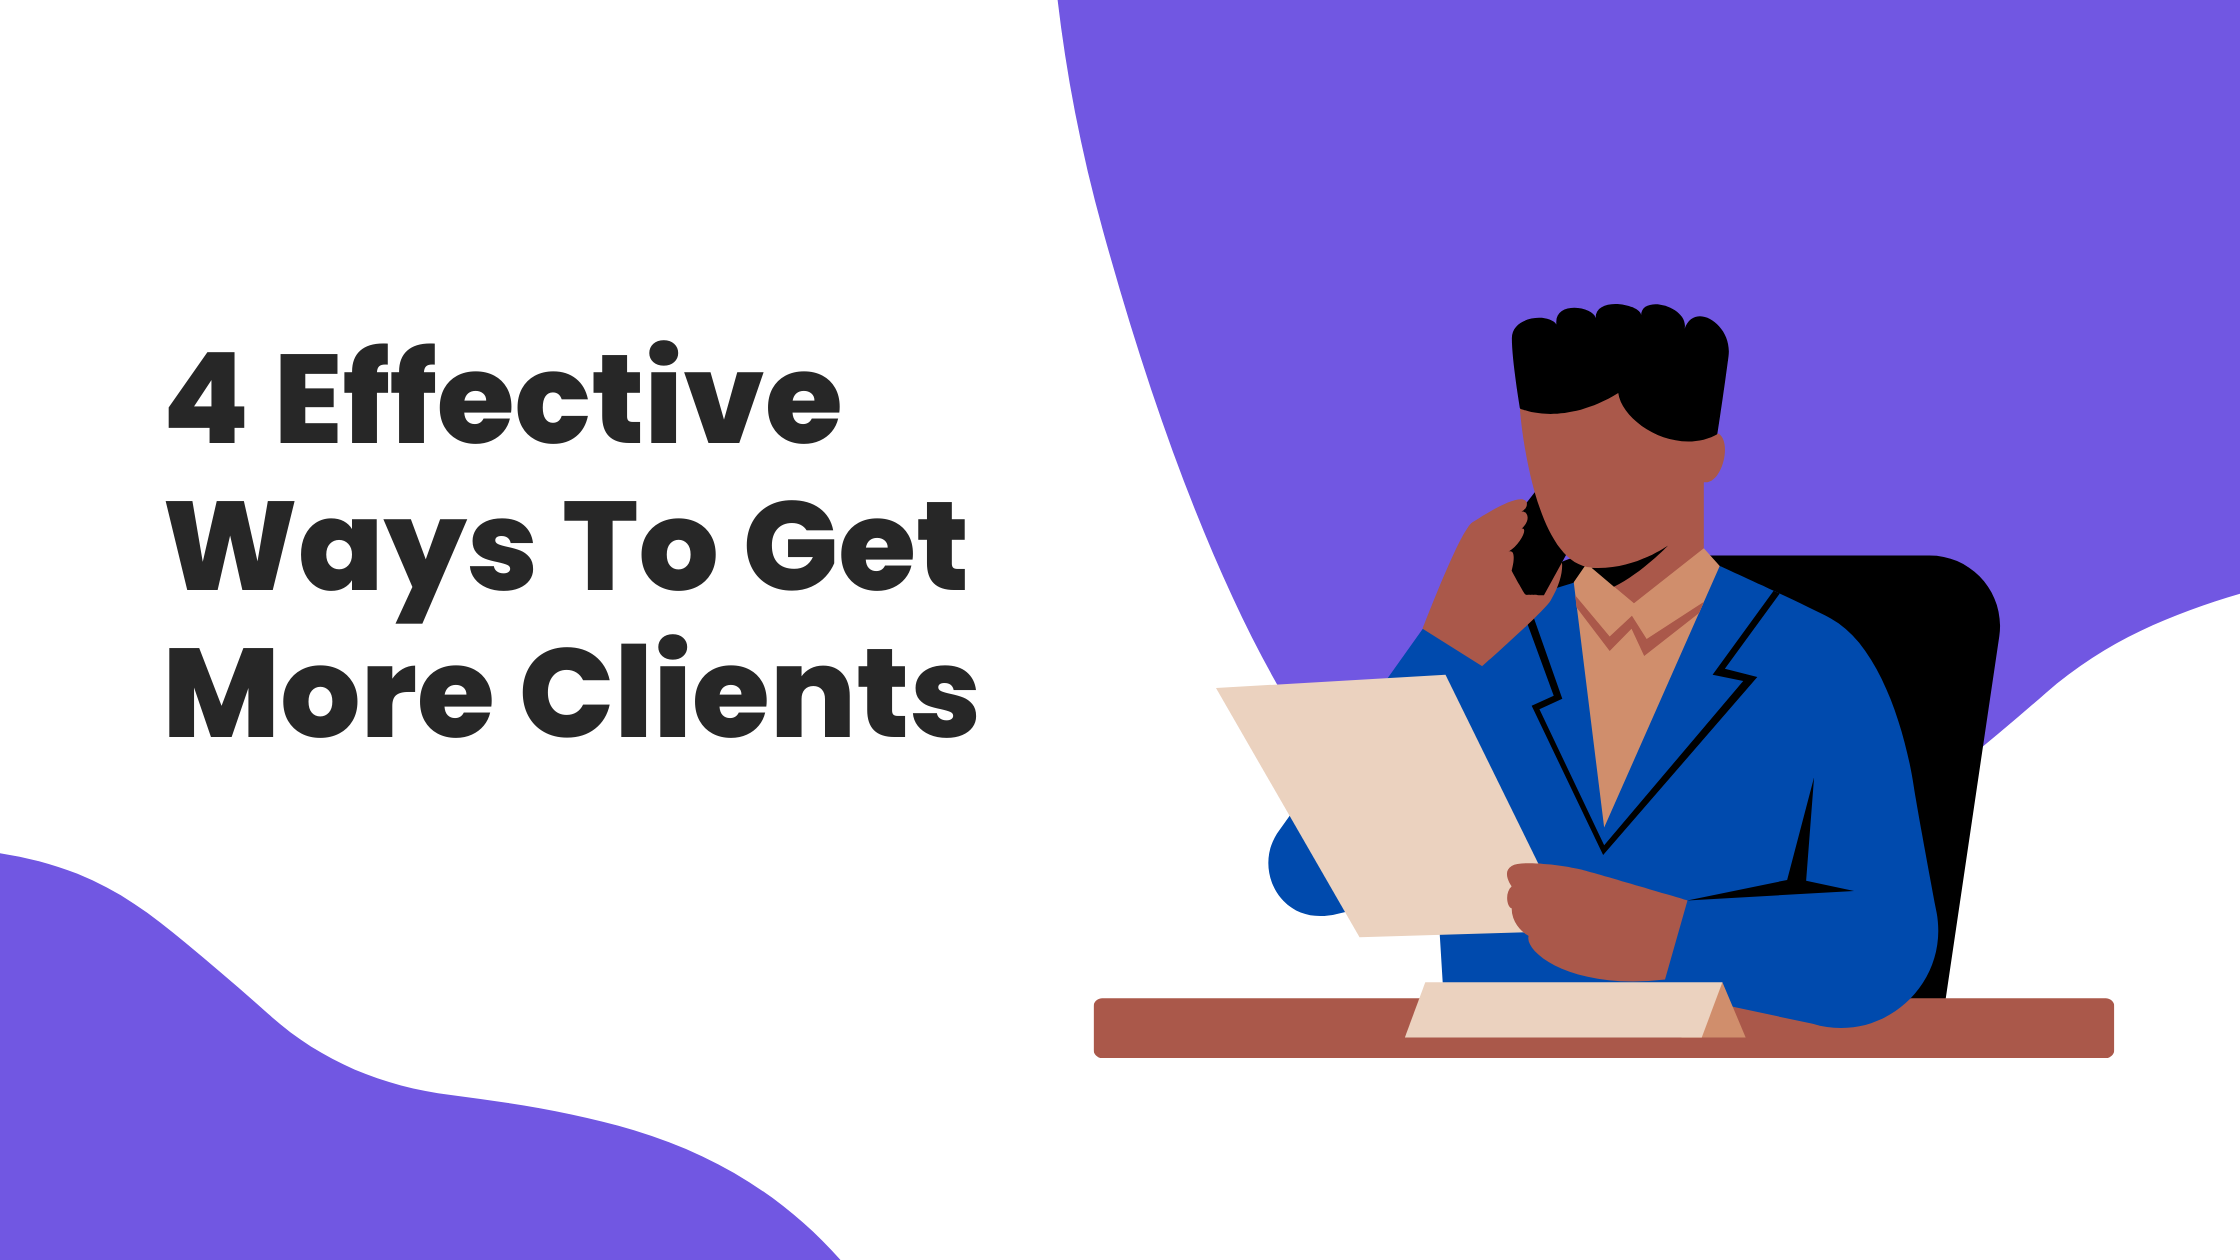 4 Effective Ways To Get More Clients